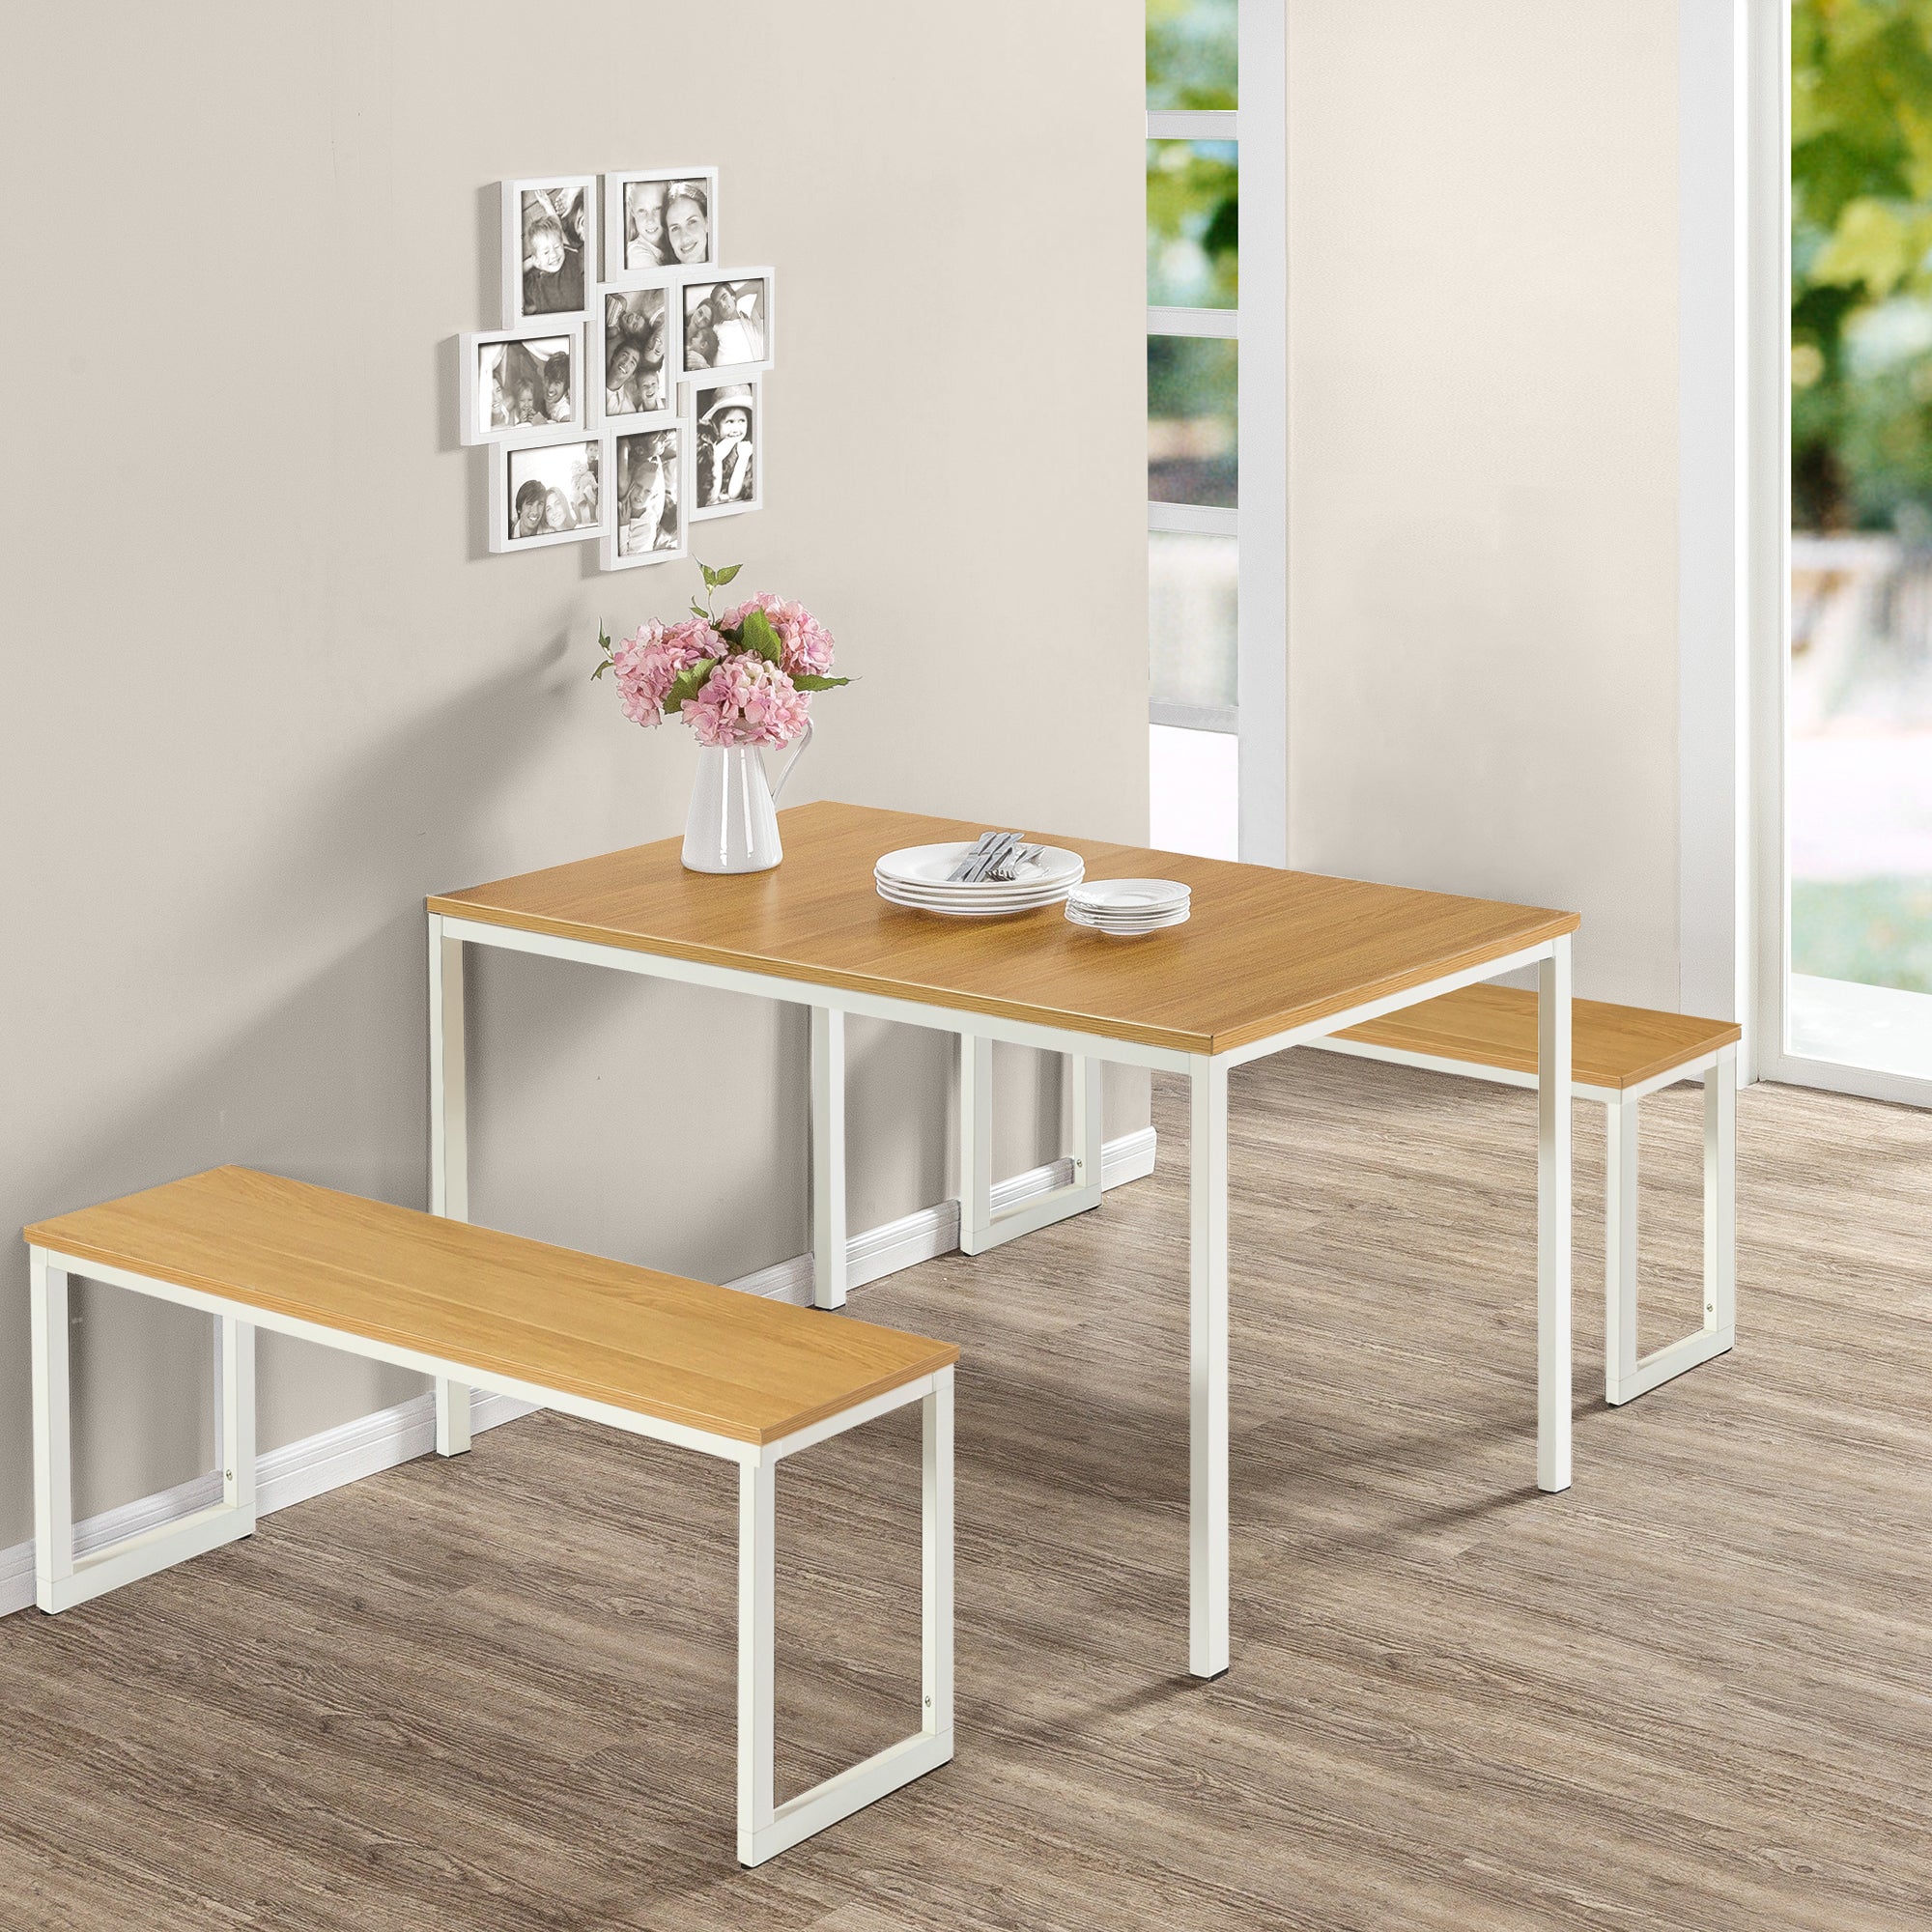 Zinus Louis Modern Studio Soho Dining Table with Two Benches - 3 Pieces Dining Table Set - White